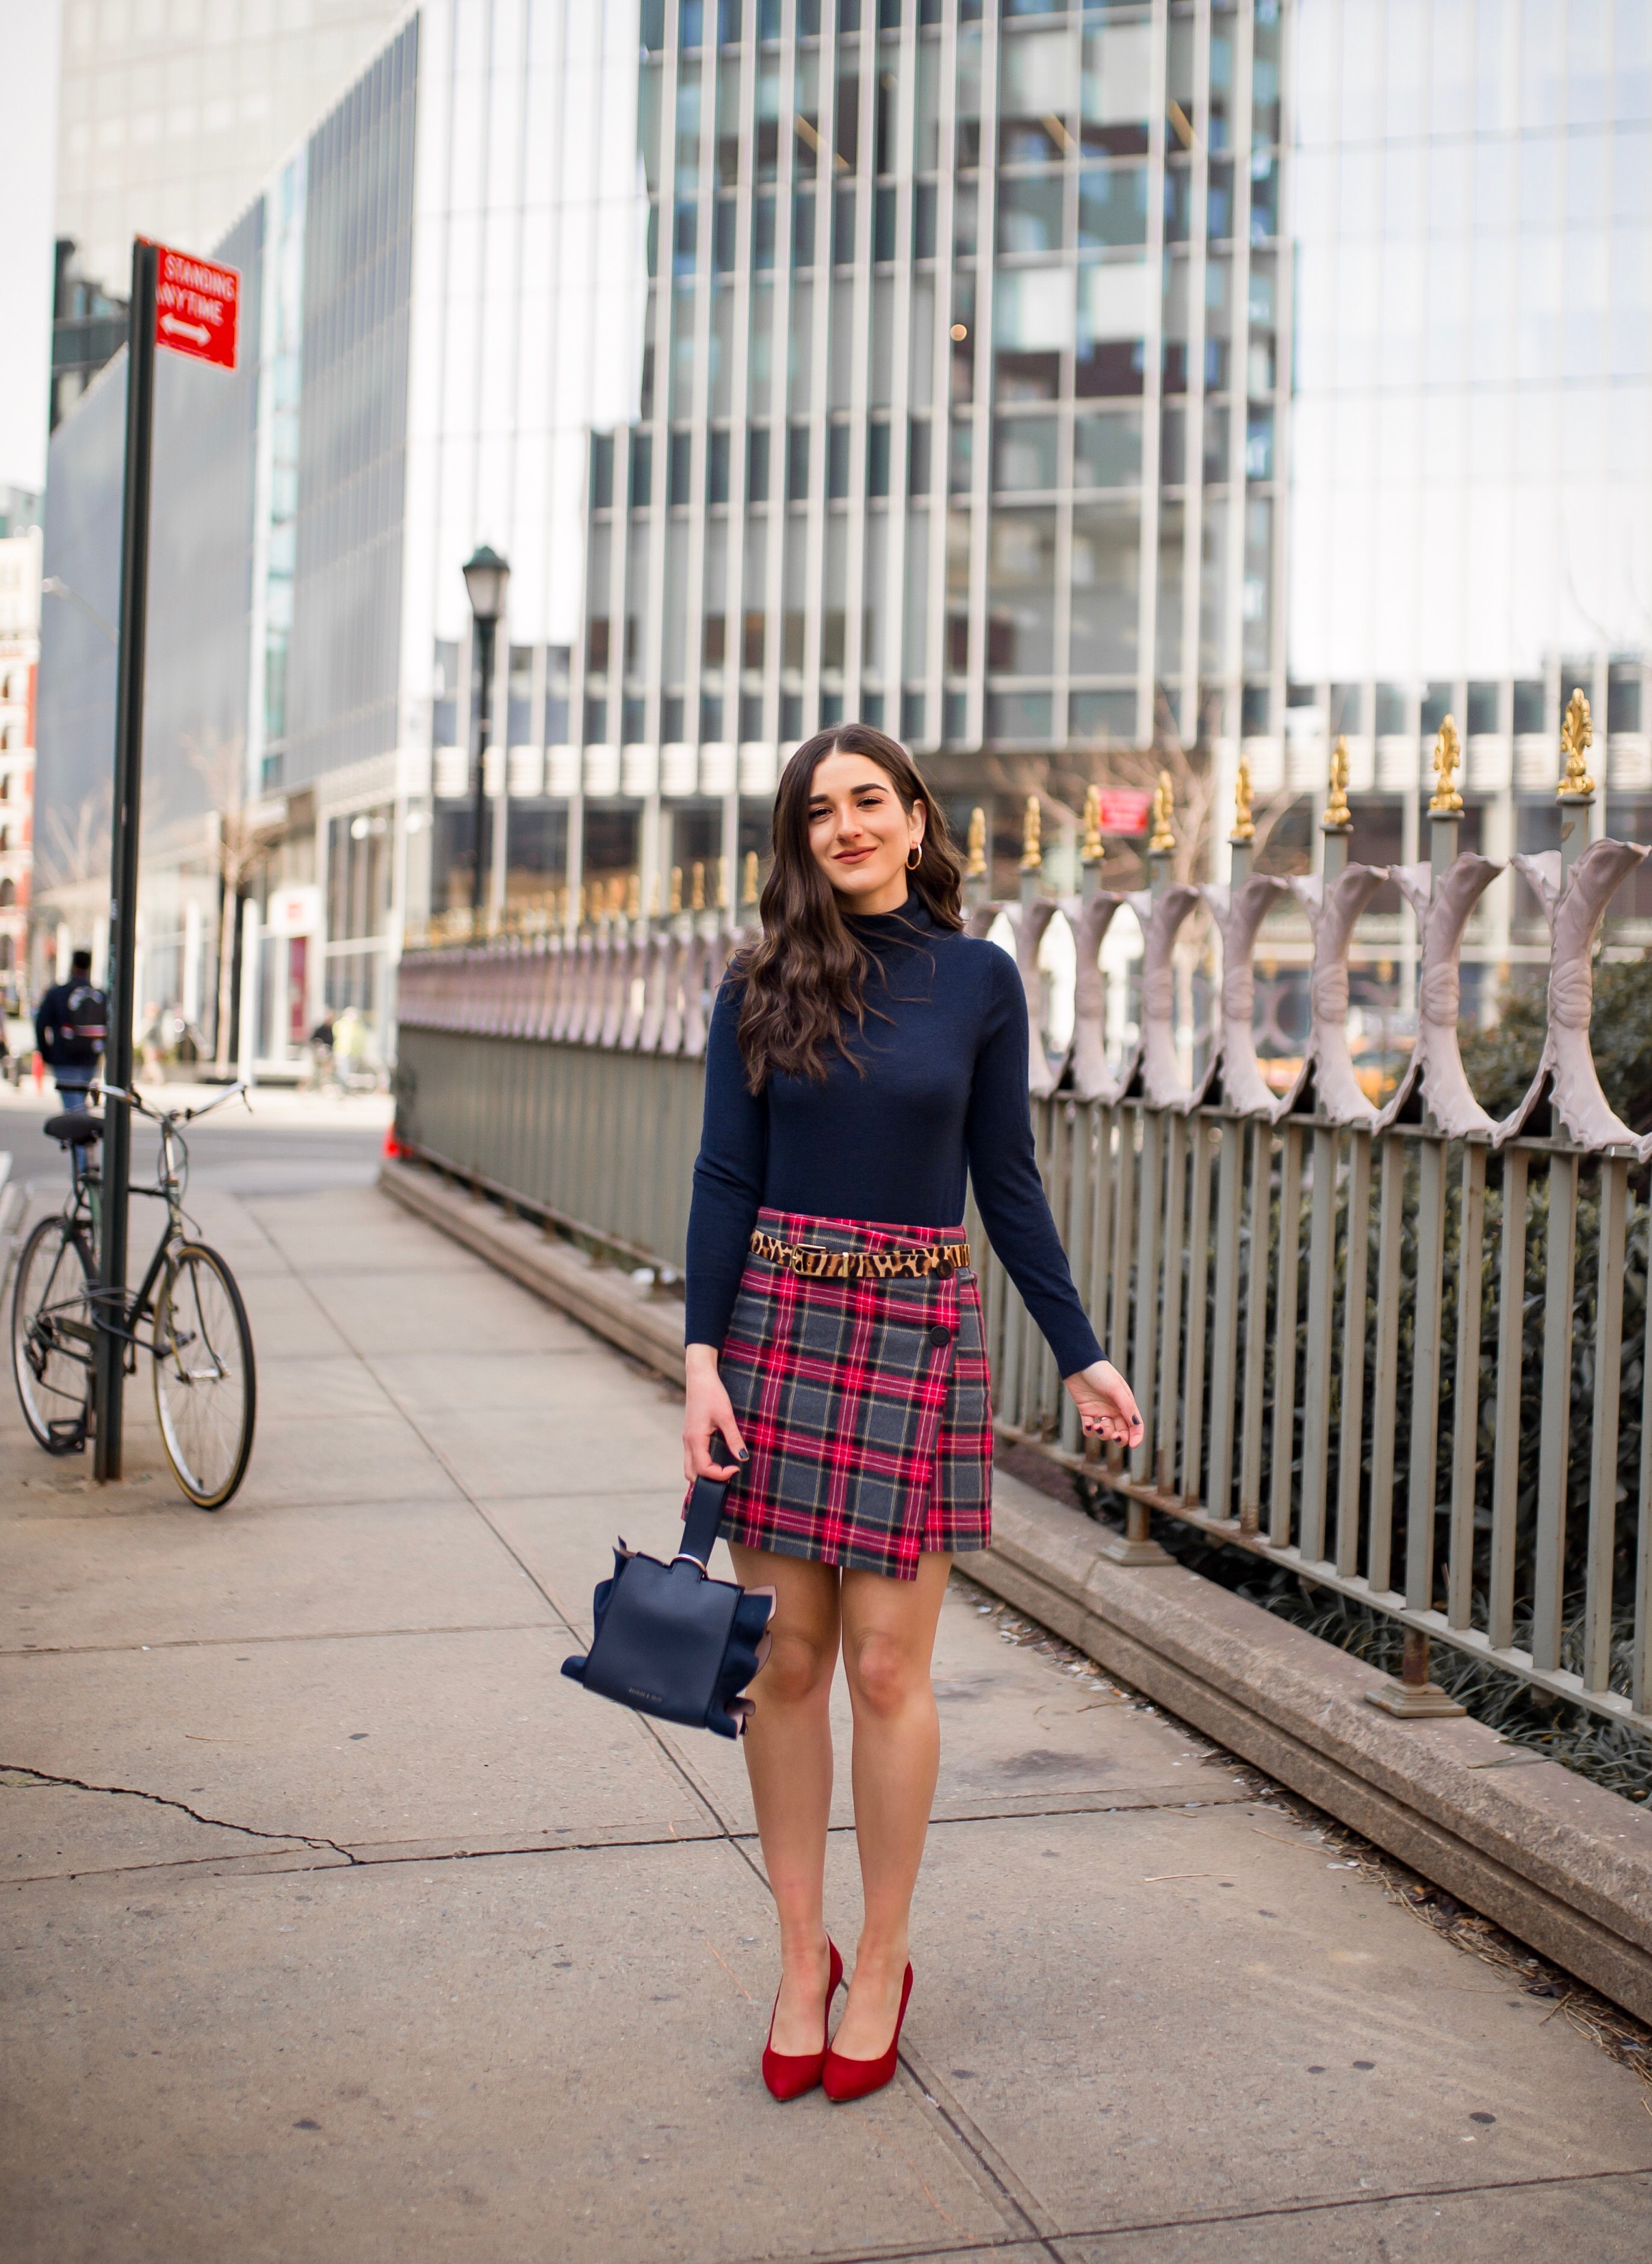 How NYFW Changed From My 1st To 12th Season Plaid Skirt Red Heels Esther Santer Fashion Blog NYC Street Style Blogger Outfit OOTD Trendy Shopping Navy Turtleneck Hair Goals Wear Winter Fall Shop Jcrew H&M Banana Republic Leopard  Belt Accessories Bag.jpg